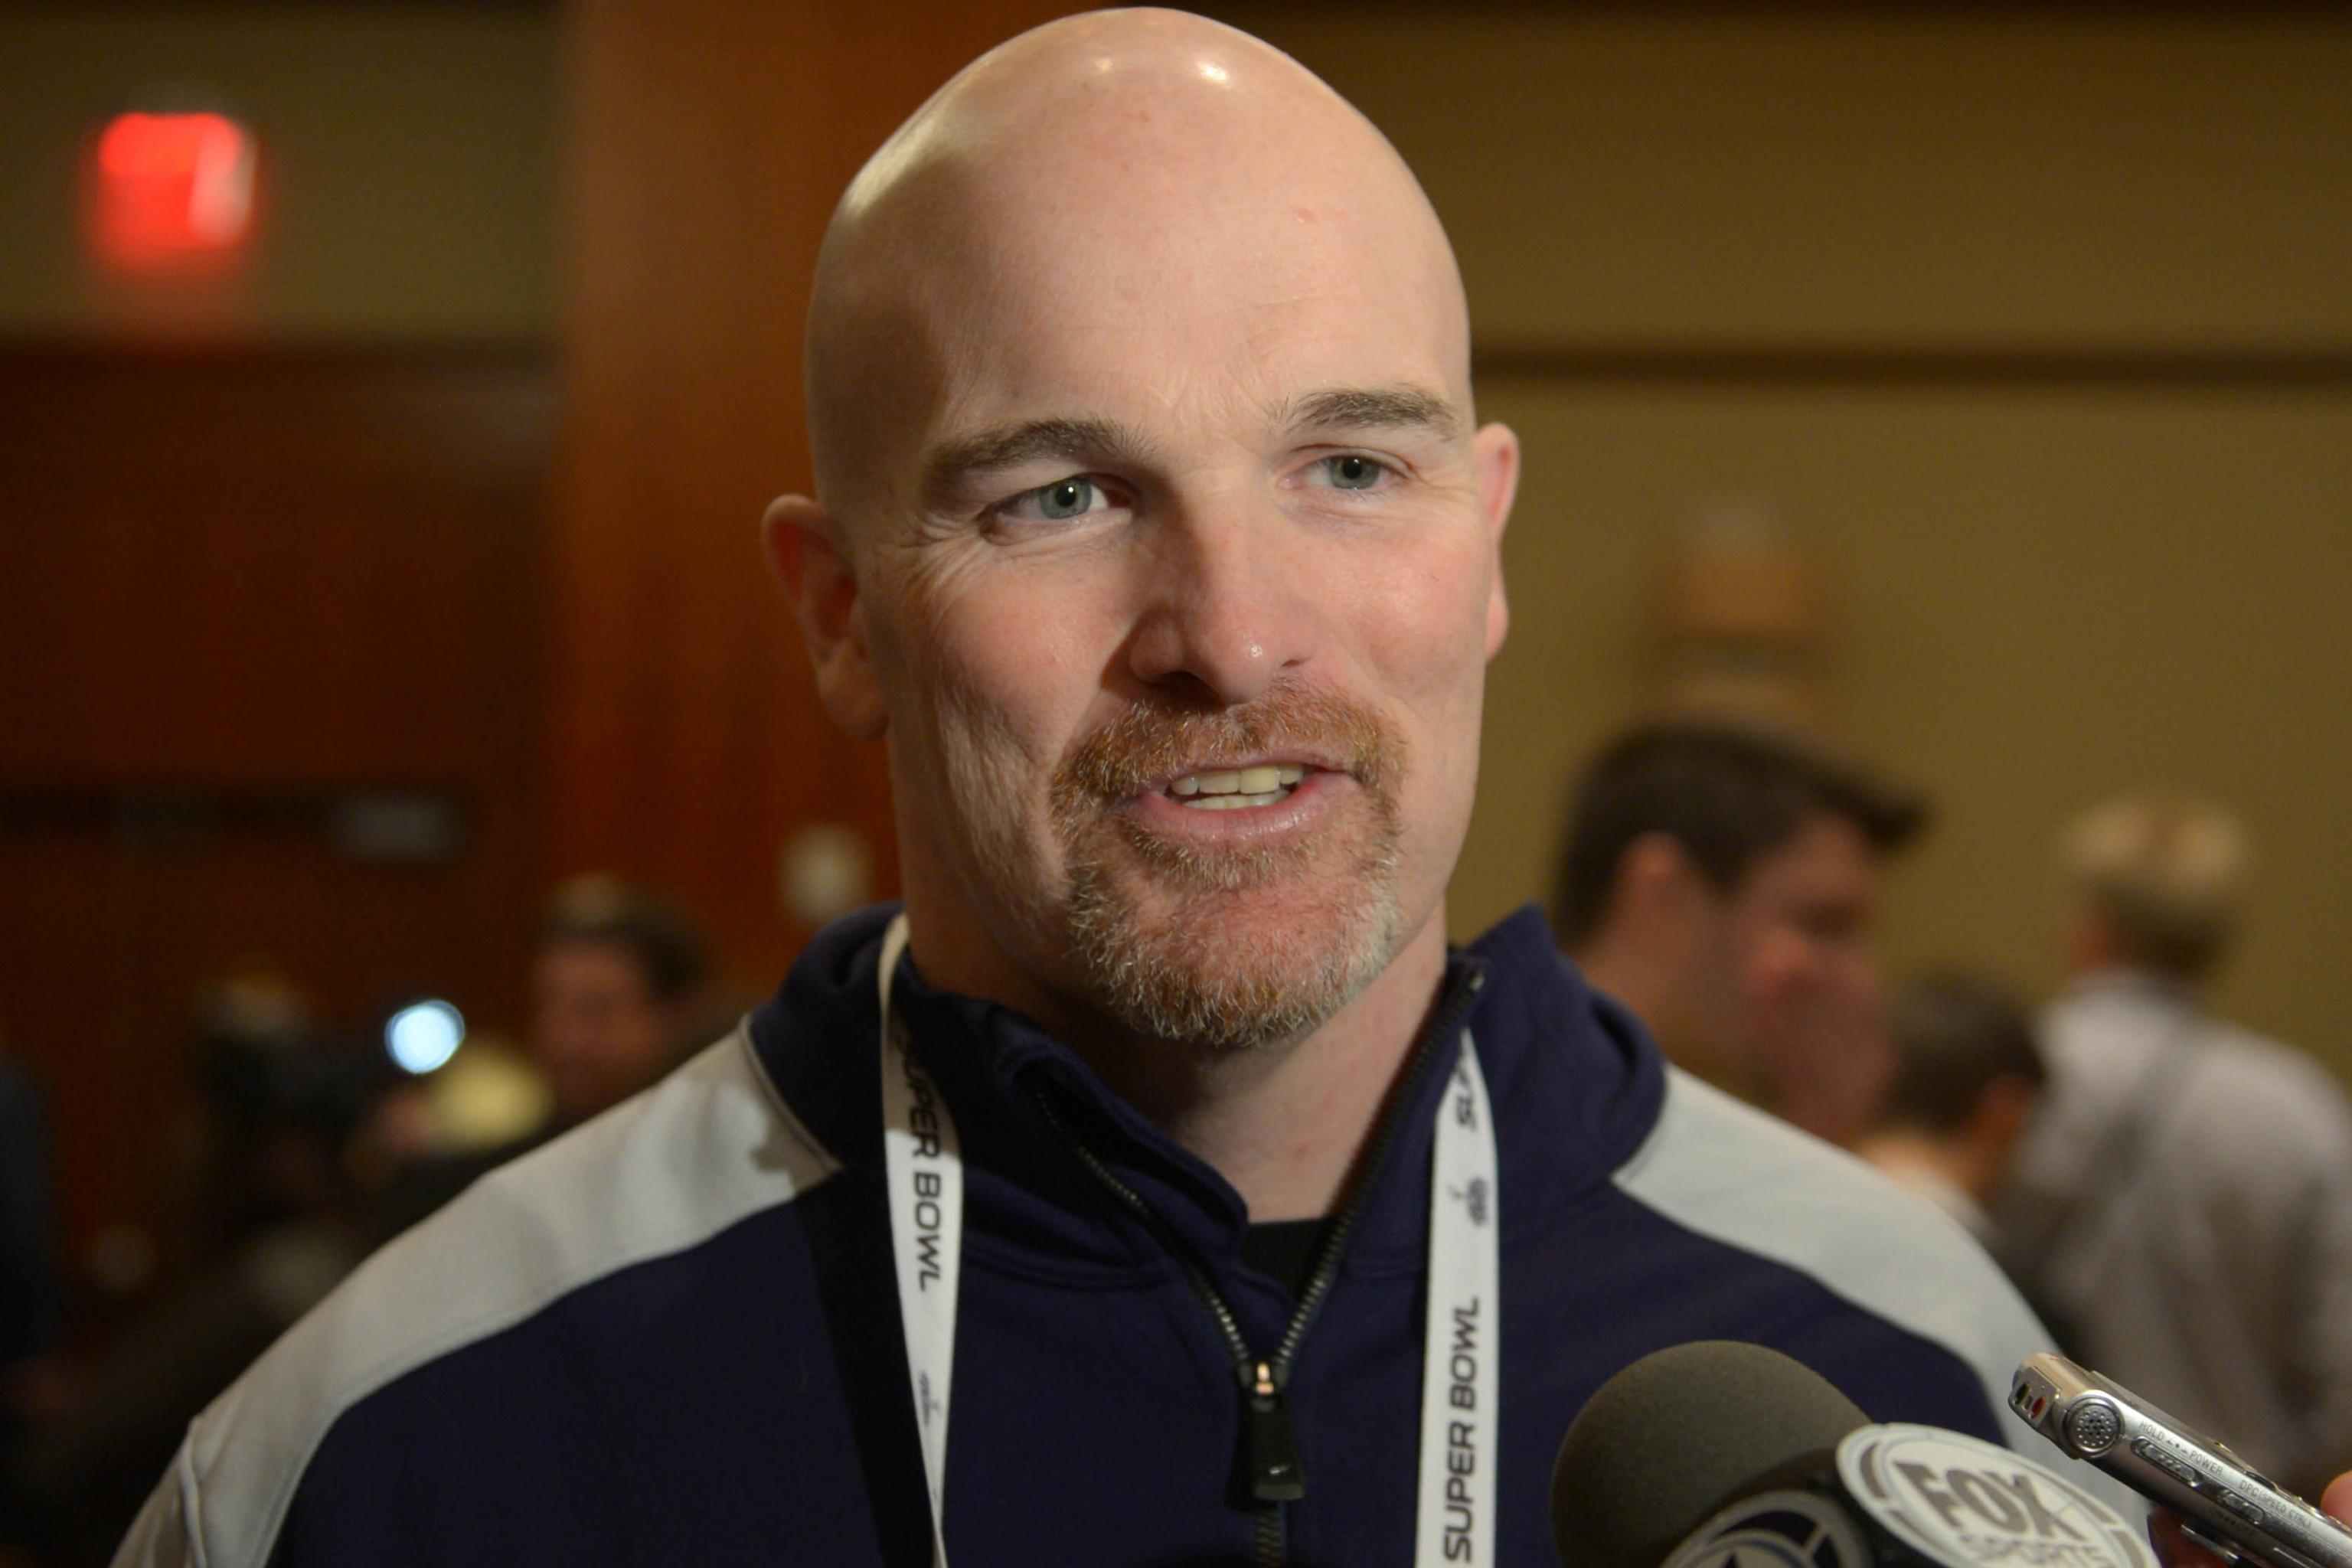 Dan Quinn to interview with Falcons tomorrow, Seahawks win means he can't  yet be hired - The Falcoholic